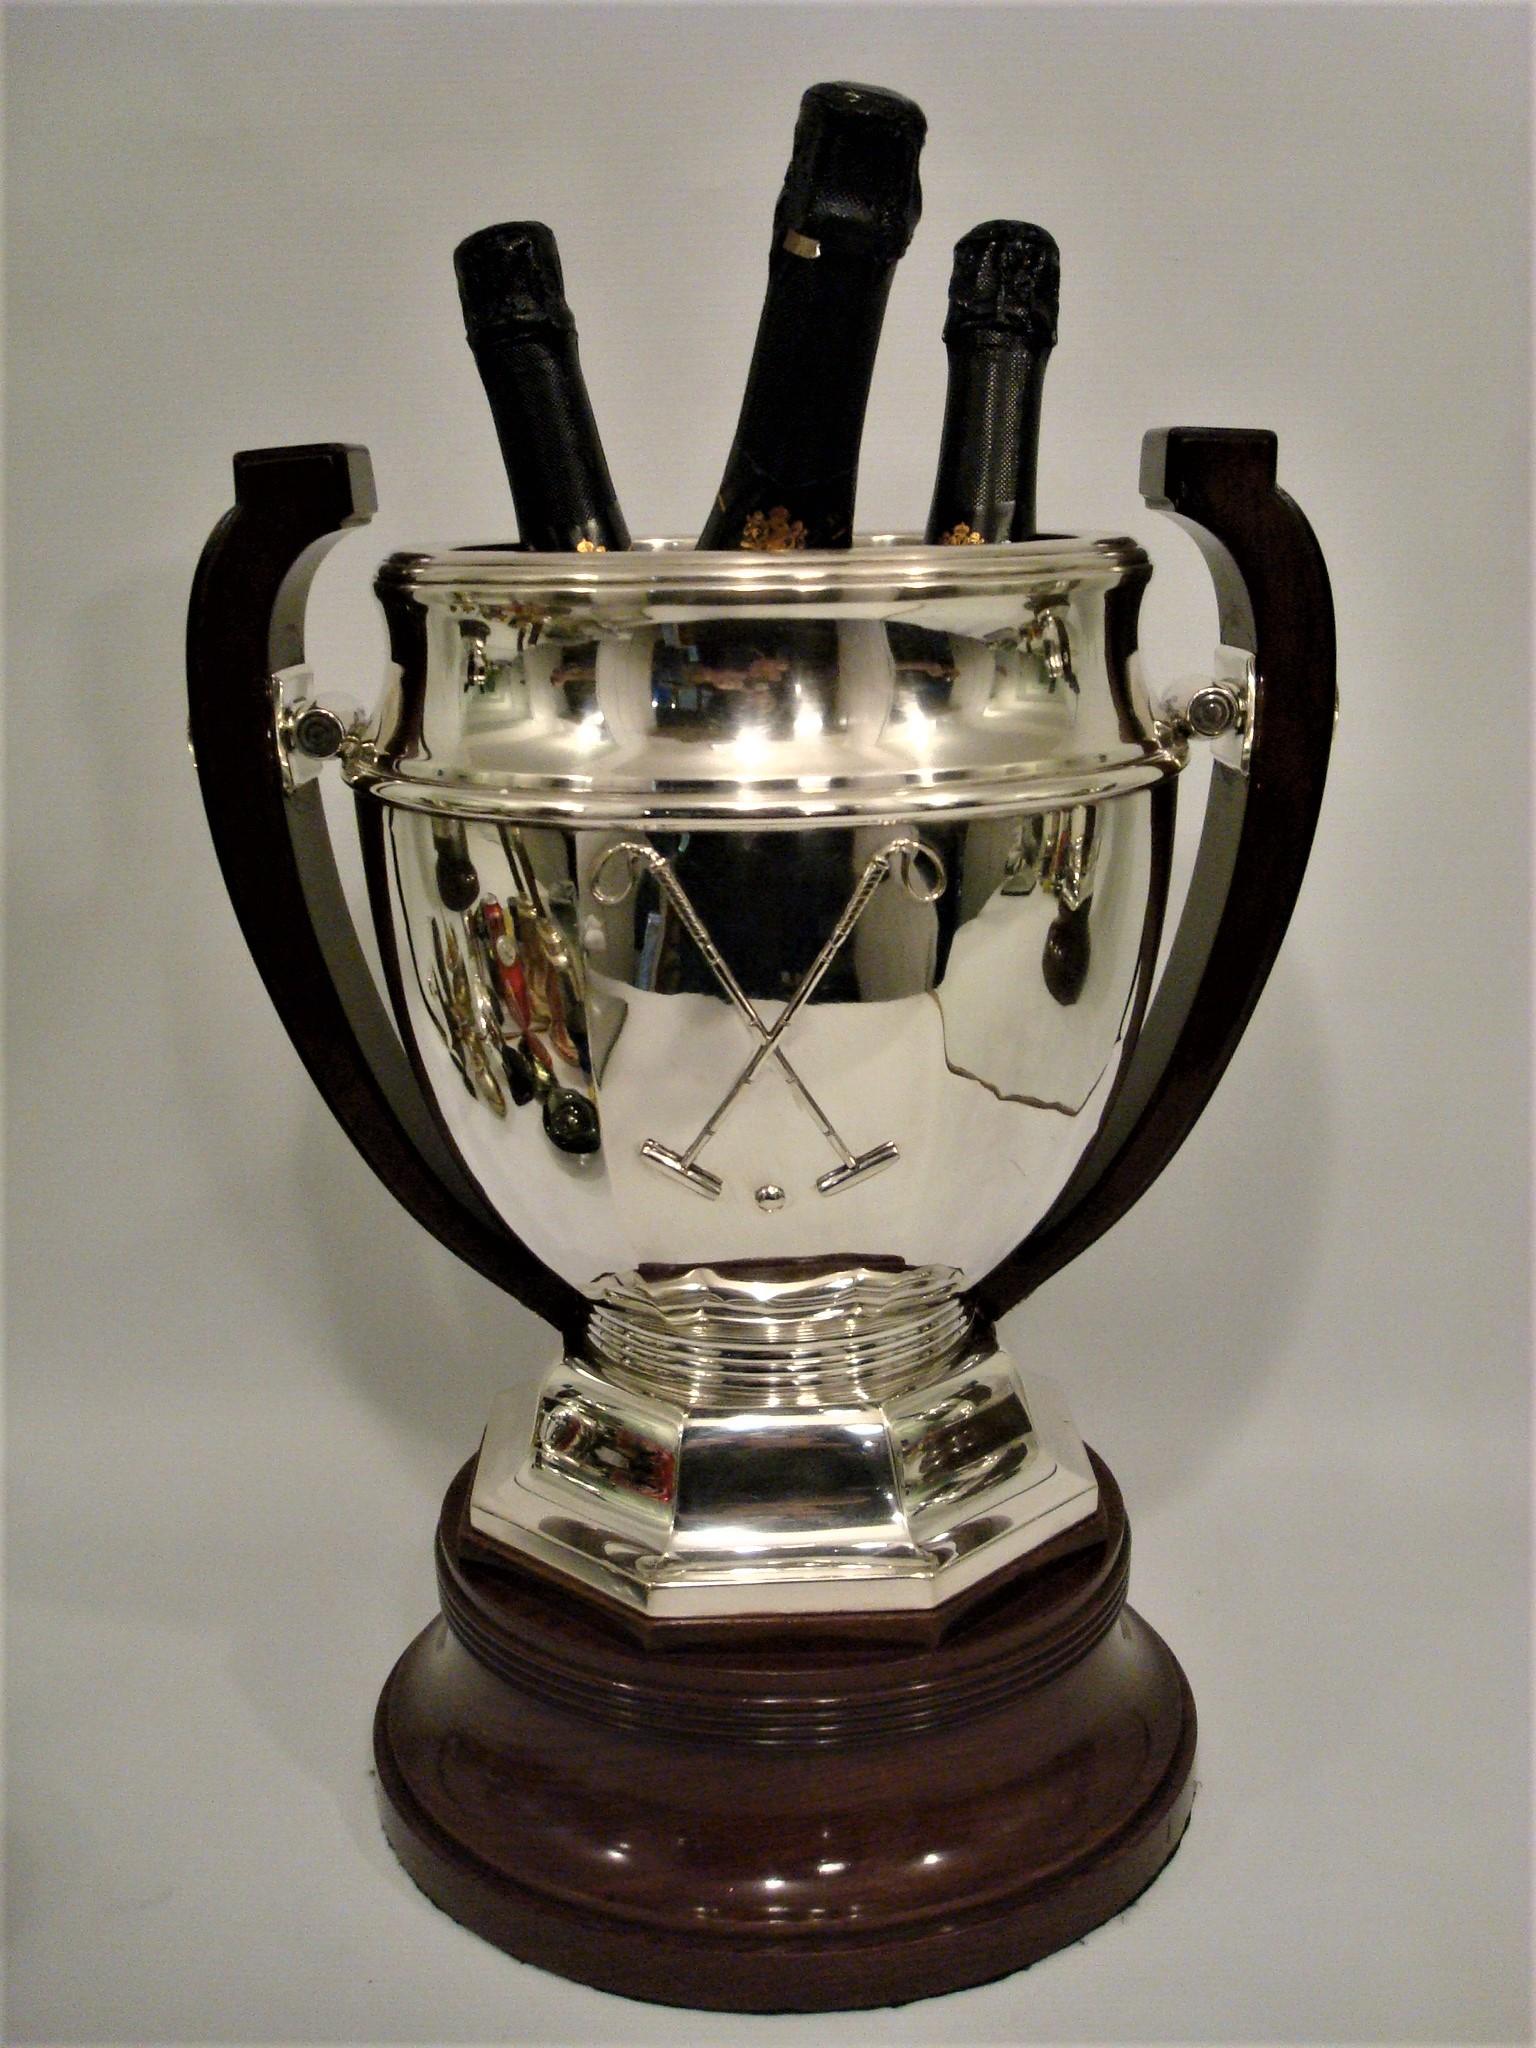 Art Deco Giant  Sterling Silver Polo Trophy - Cup - Champagne Cooler. Circa 1920. Fantastic Art Deco Polo Trophy. It can be used as a Wine or Champagne Cooler, you can fit upto 3 botles in it. On the front of the trophy you can see two crossed polo